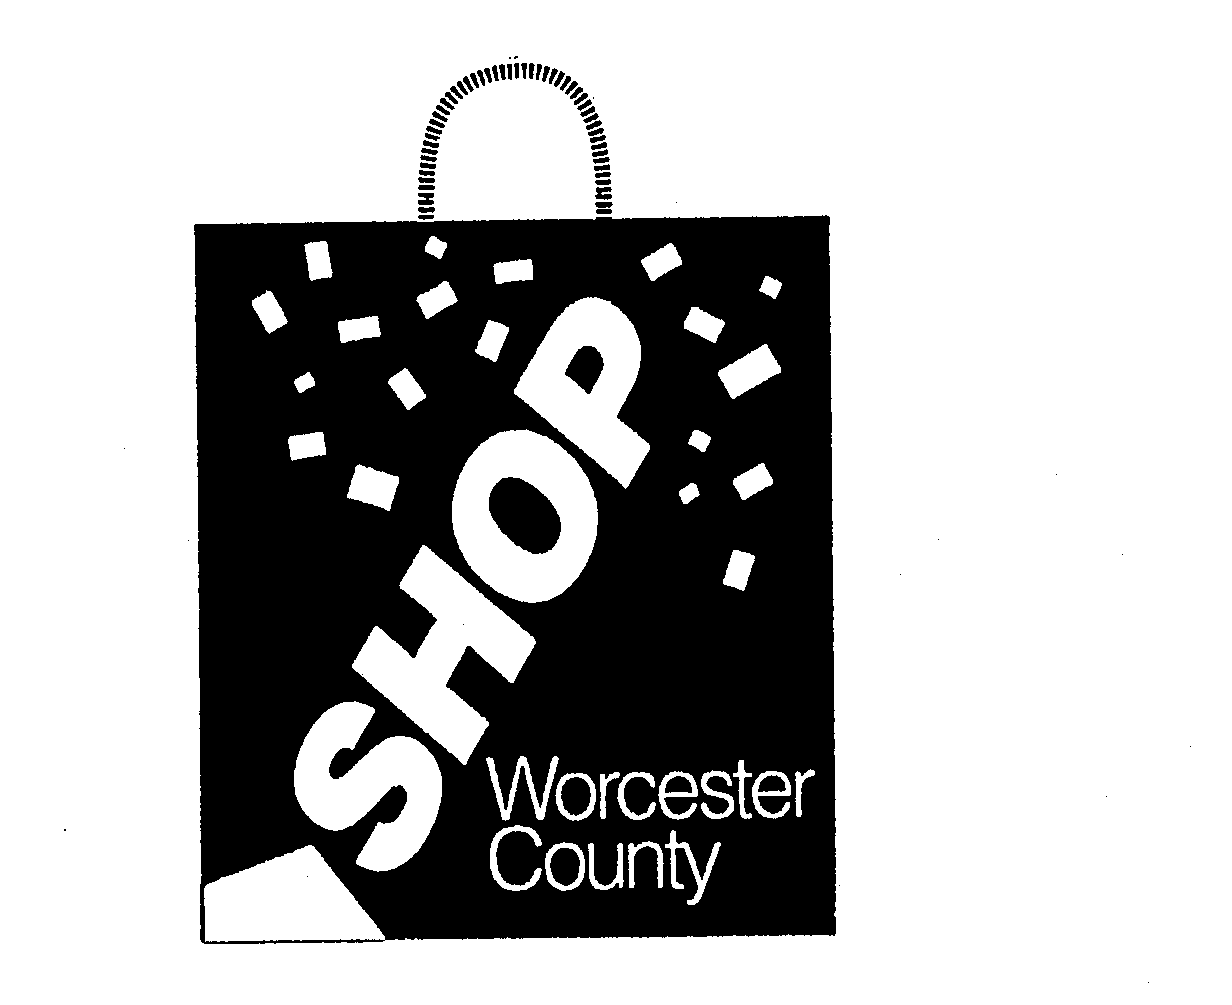  SHOP WORCESTER COUNTY